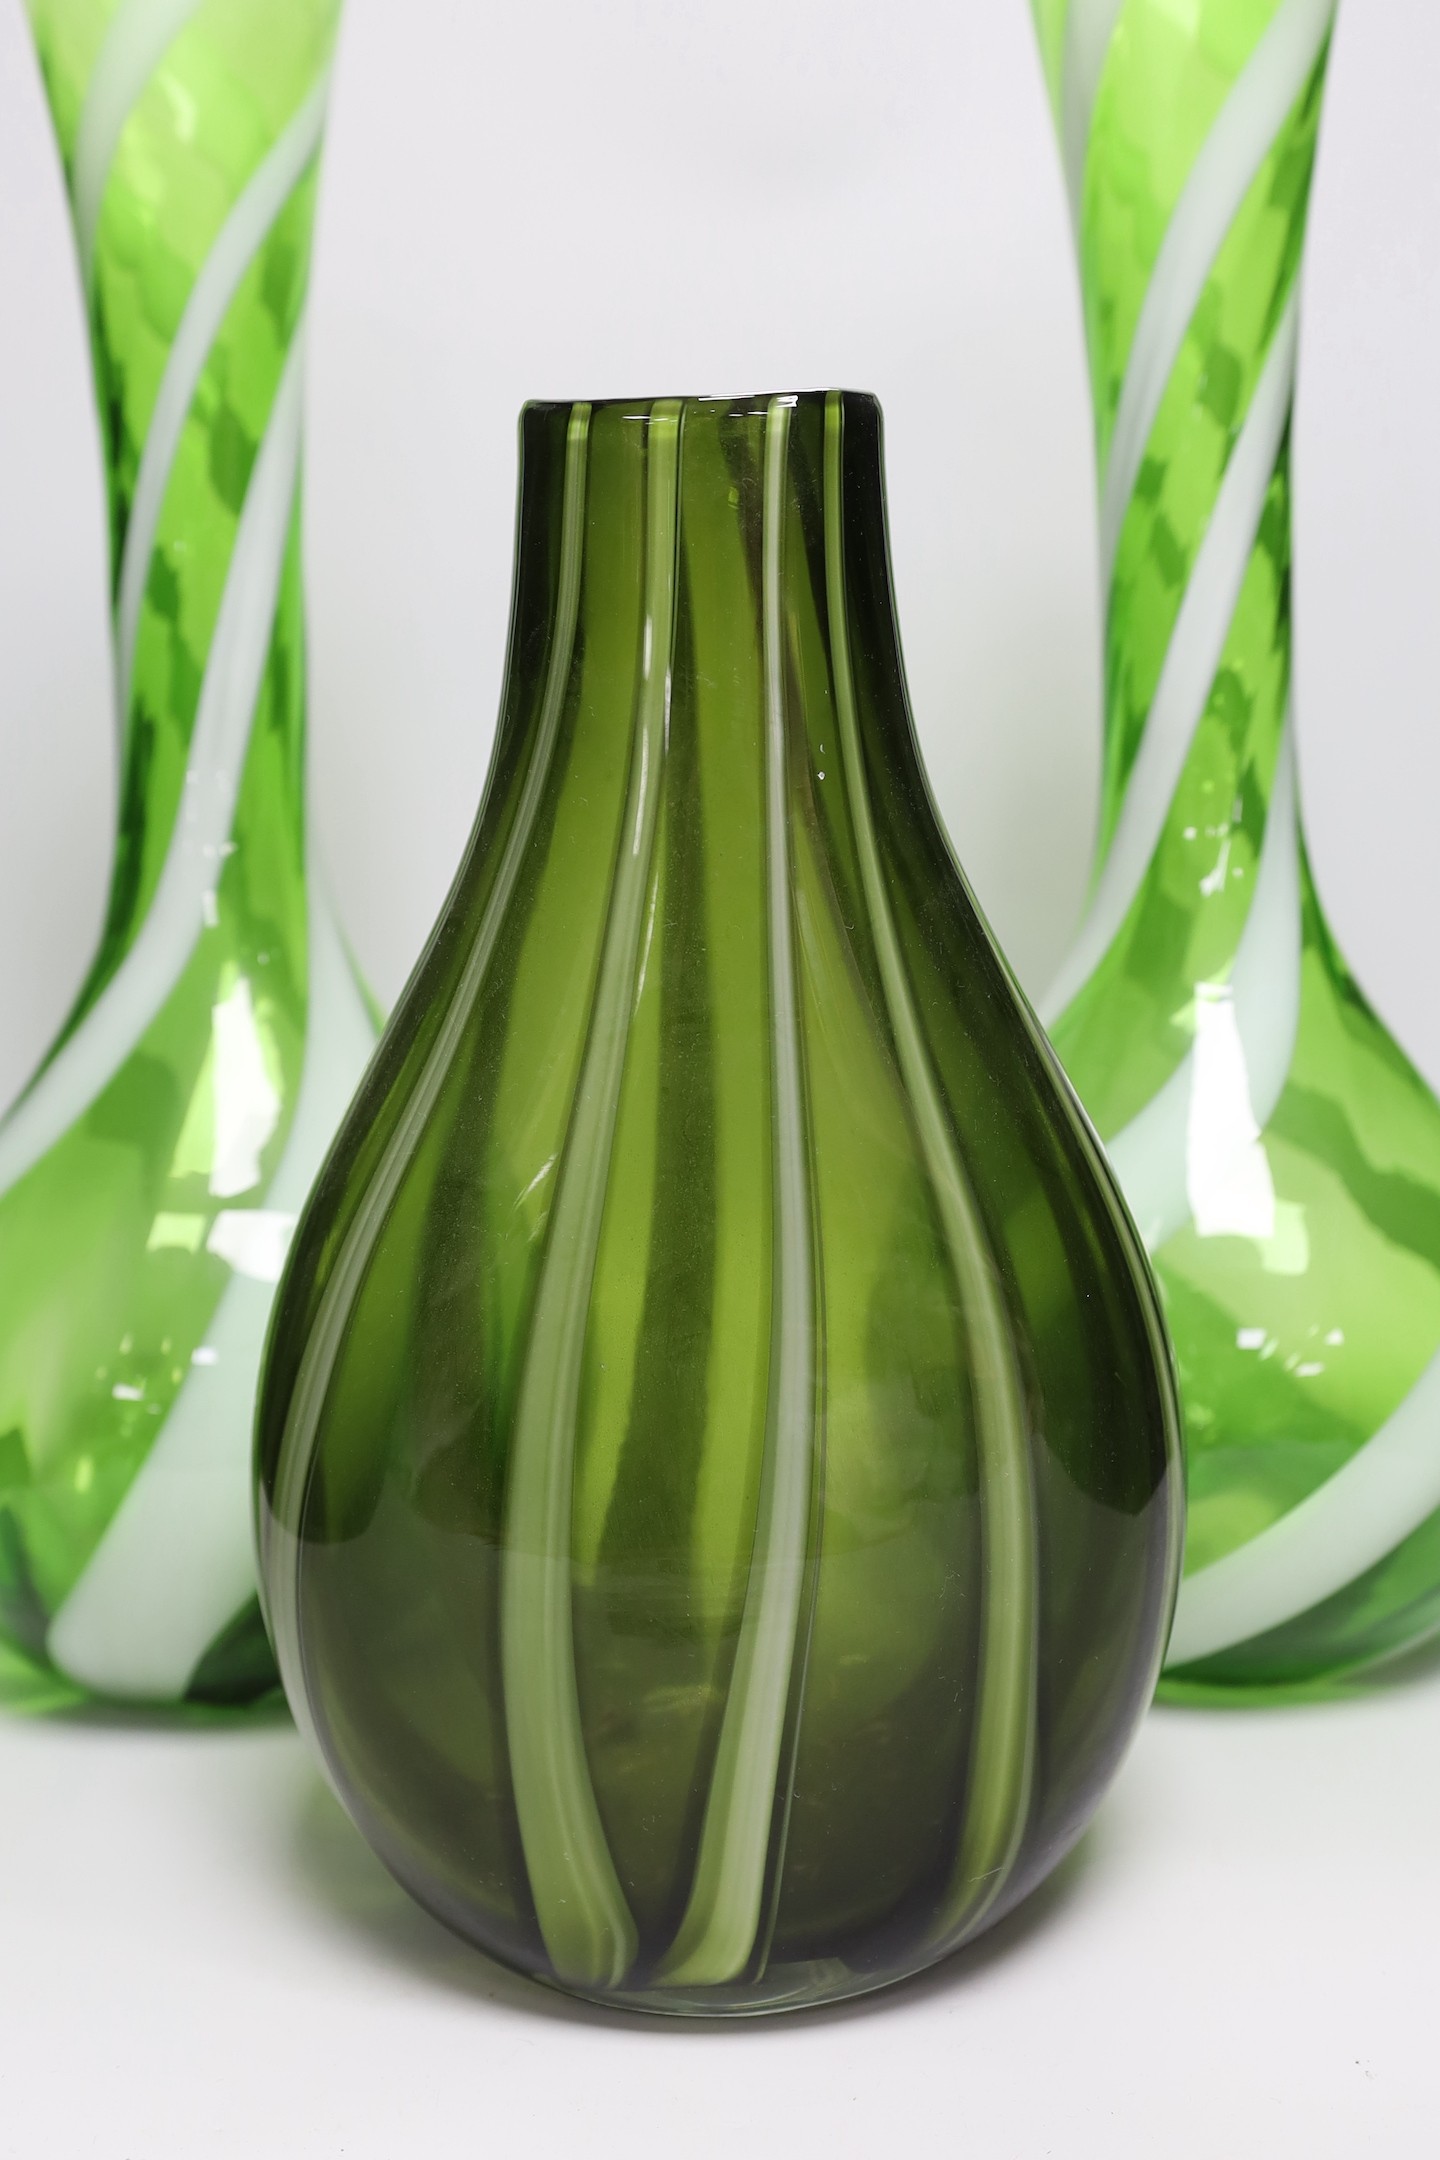 A pair of tall Murano green and white swirled glass vases and another Murano glass vase, tallest 50cm